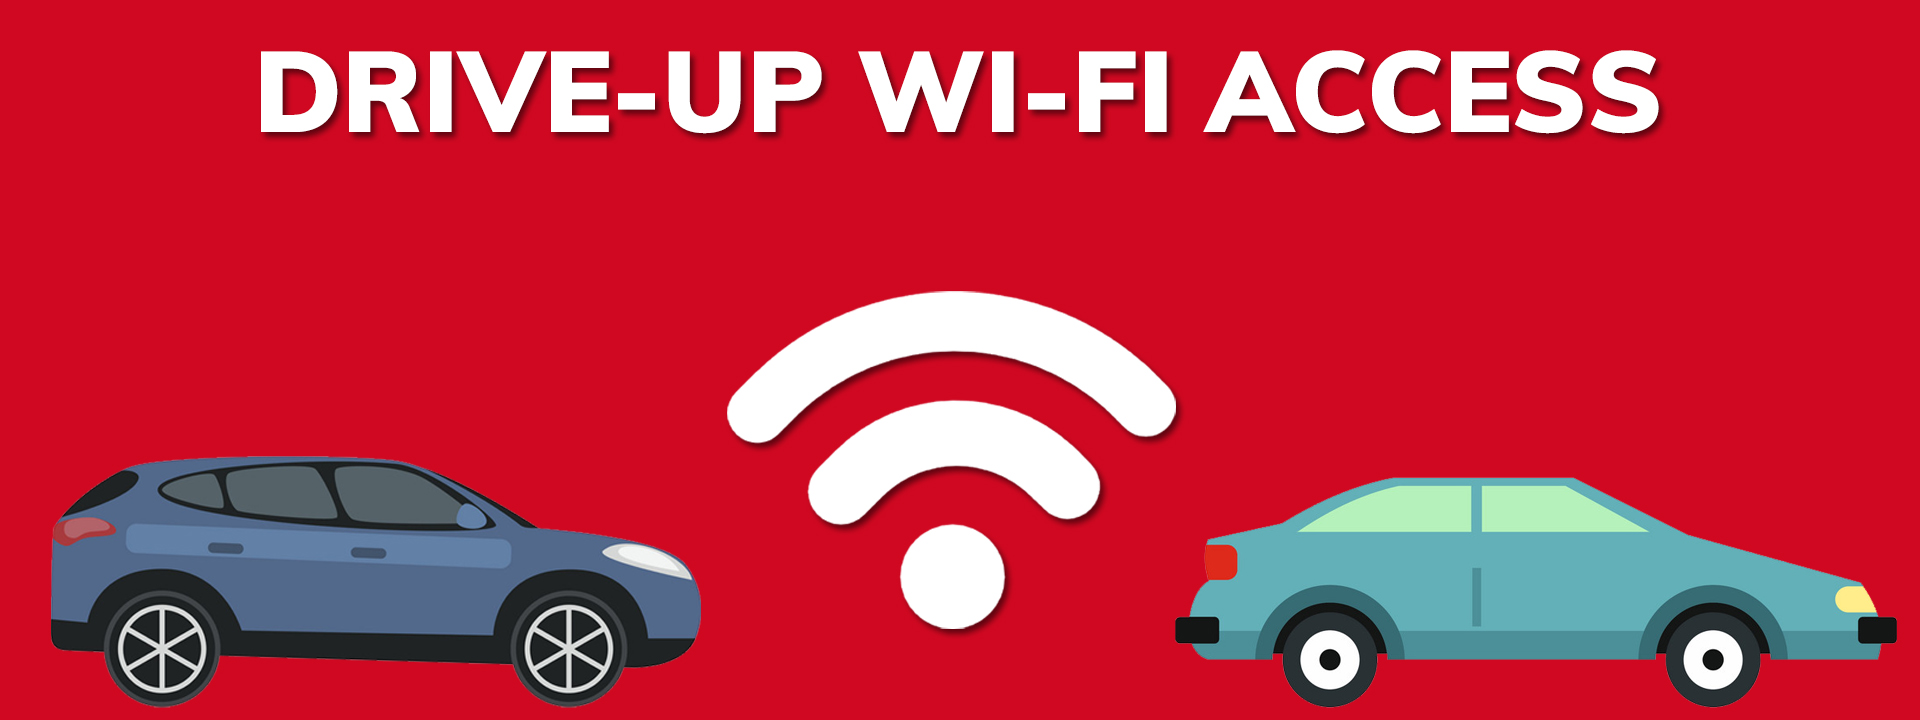 drive-up wi-fi access with image of two cars and internet signal